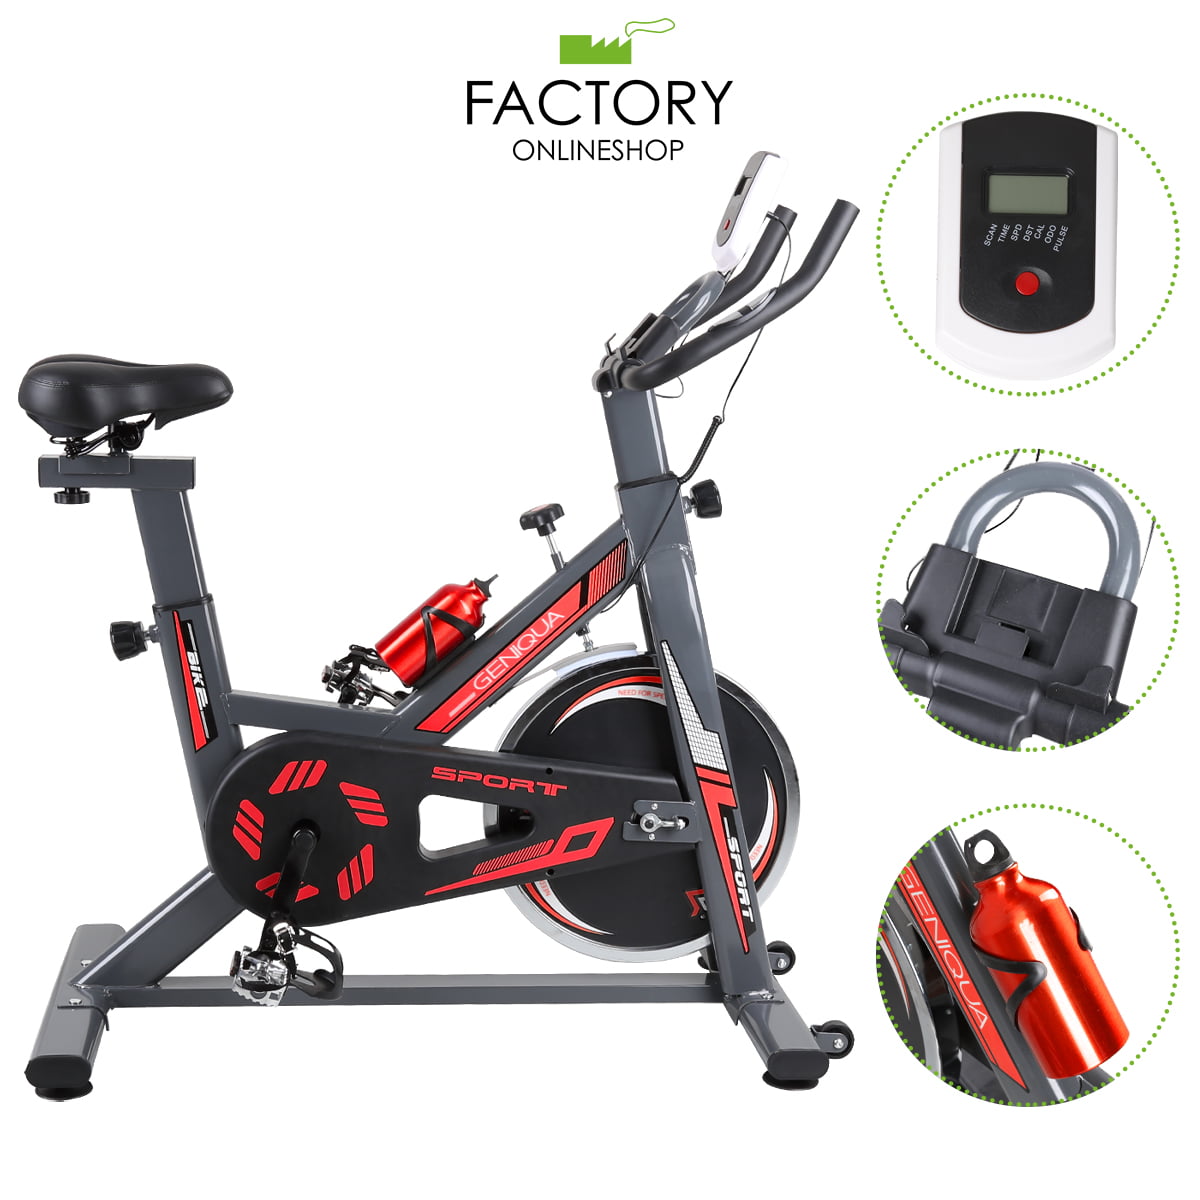 Pro Stationary Exercise Bike Bicycle Trainer Fitness Cardio Cycling Training Hom 